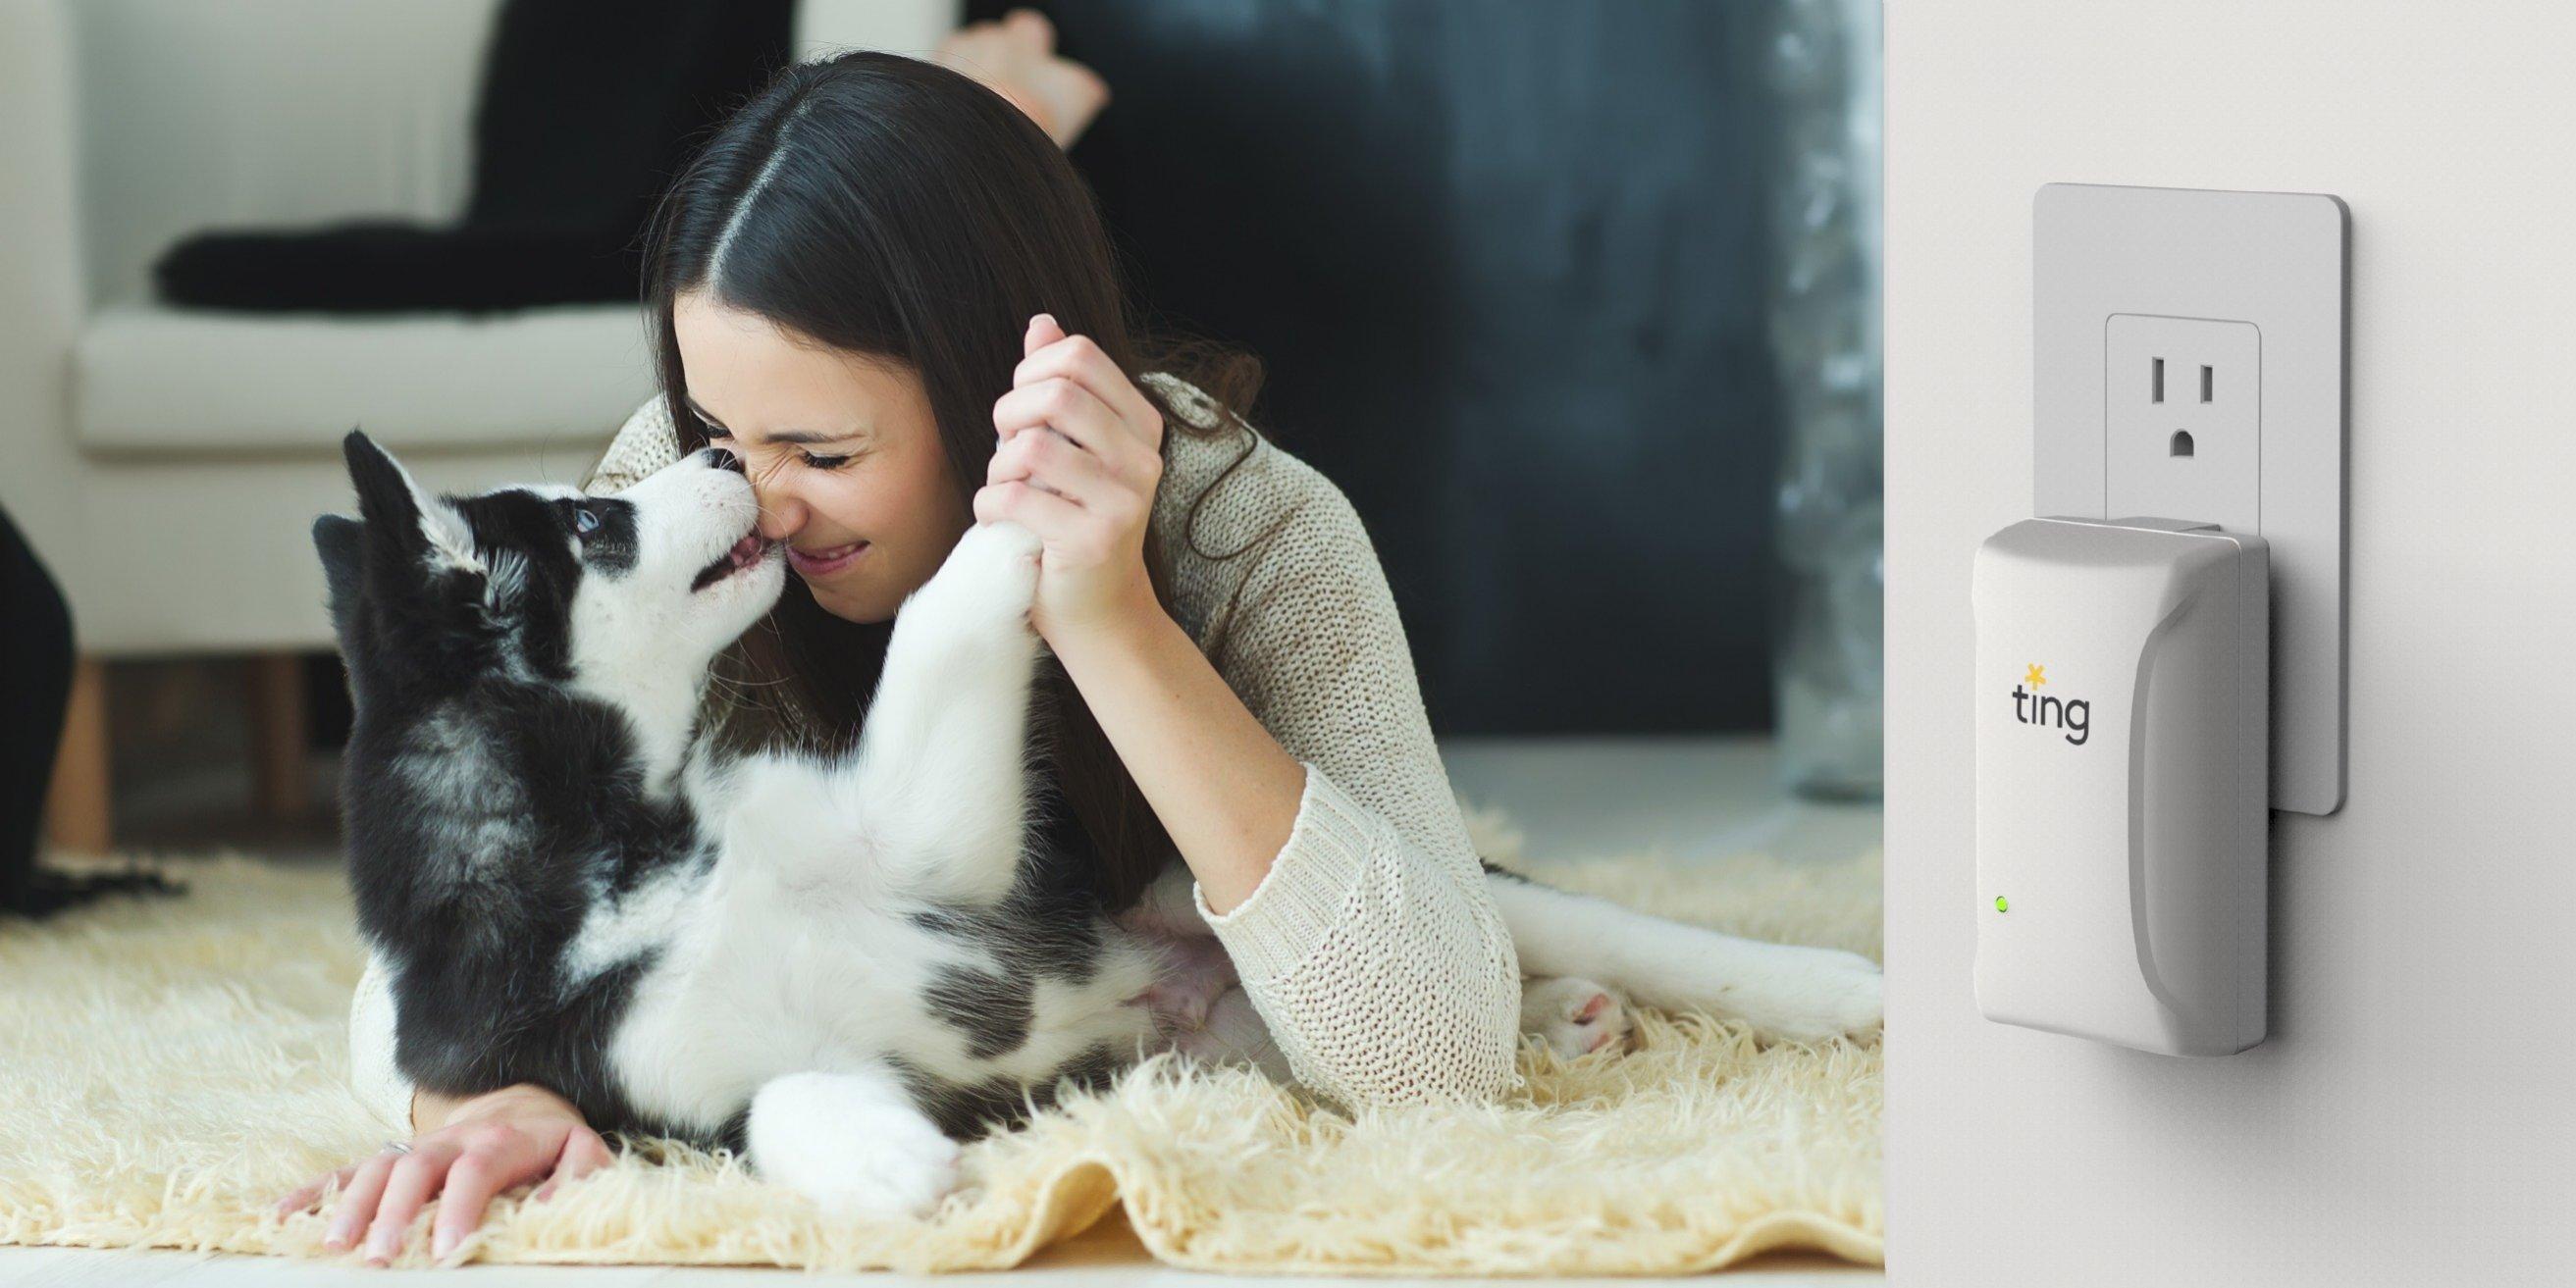 A woman snuggles a husky puppy in her living room that has a Ting sensor plugged in to an electrical outlet.